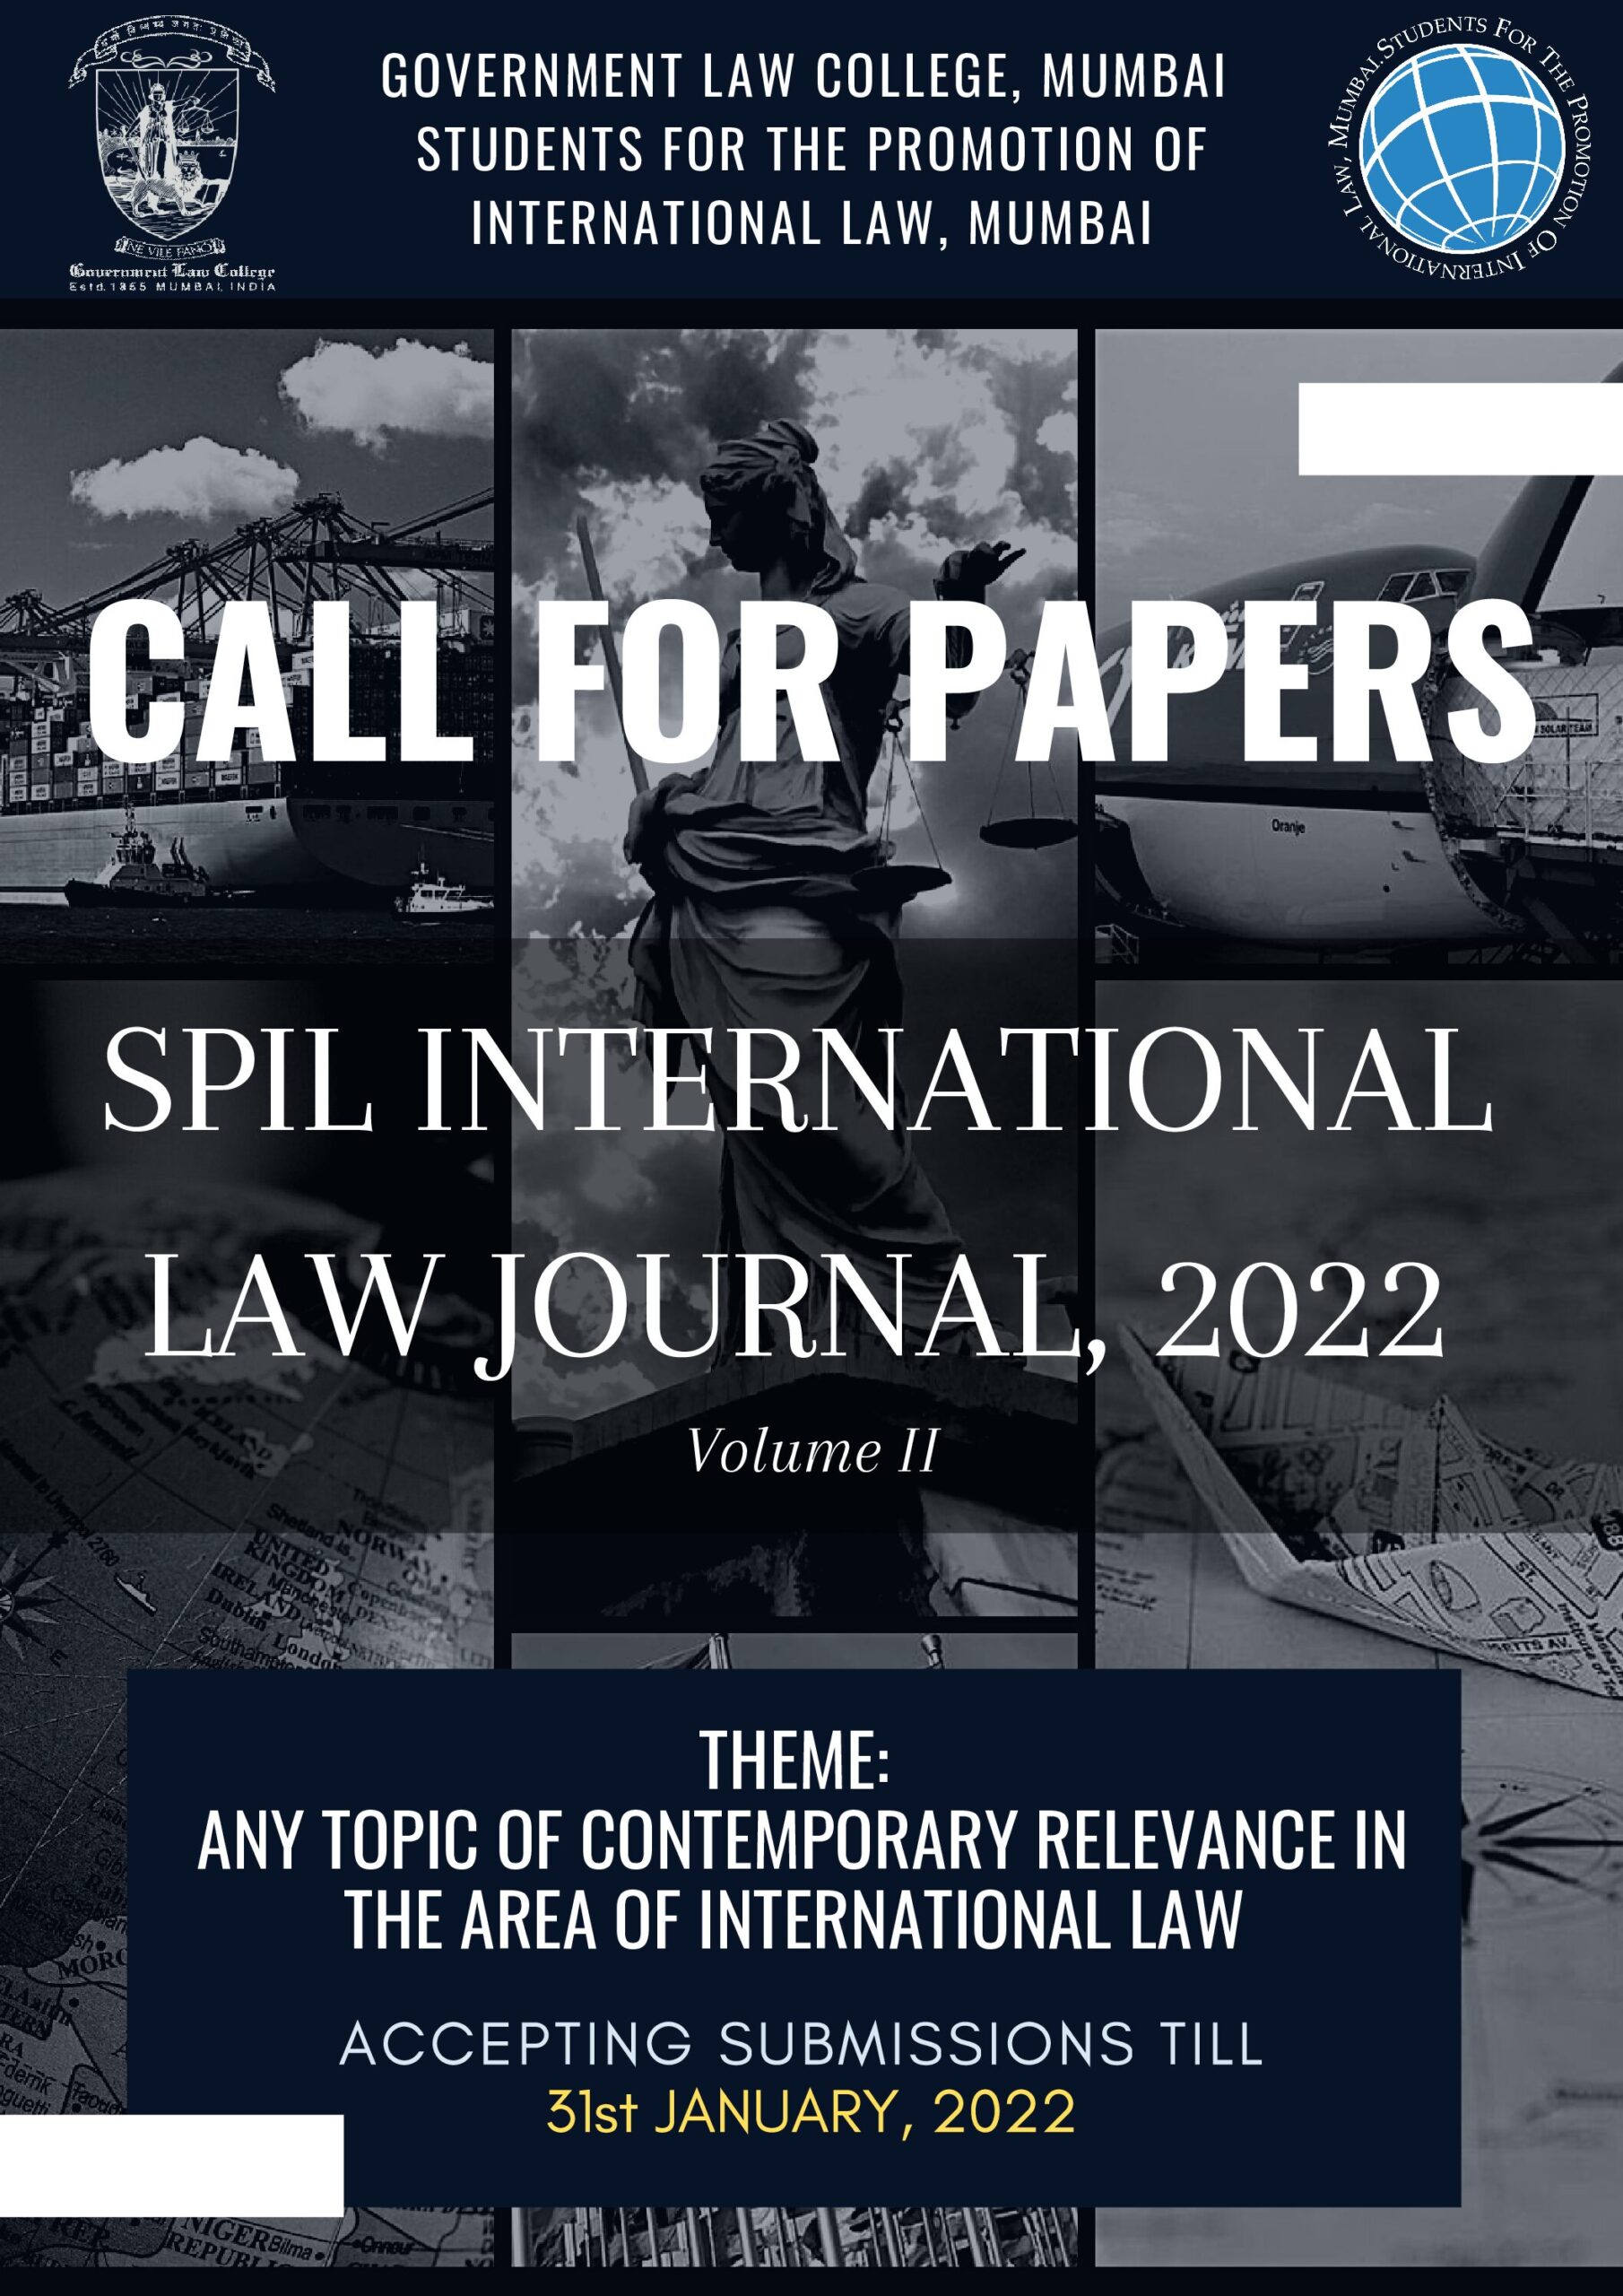 Call for Papers for Law Students- SPIL, Mumbai International Law Journal Volume II, 2022.